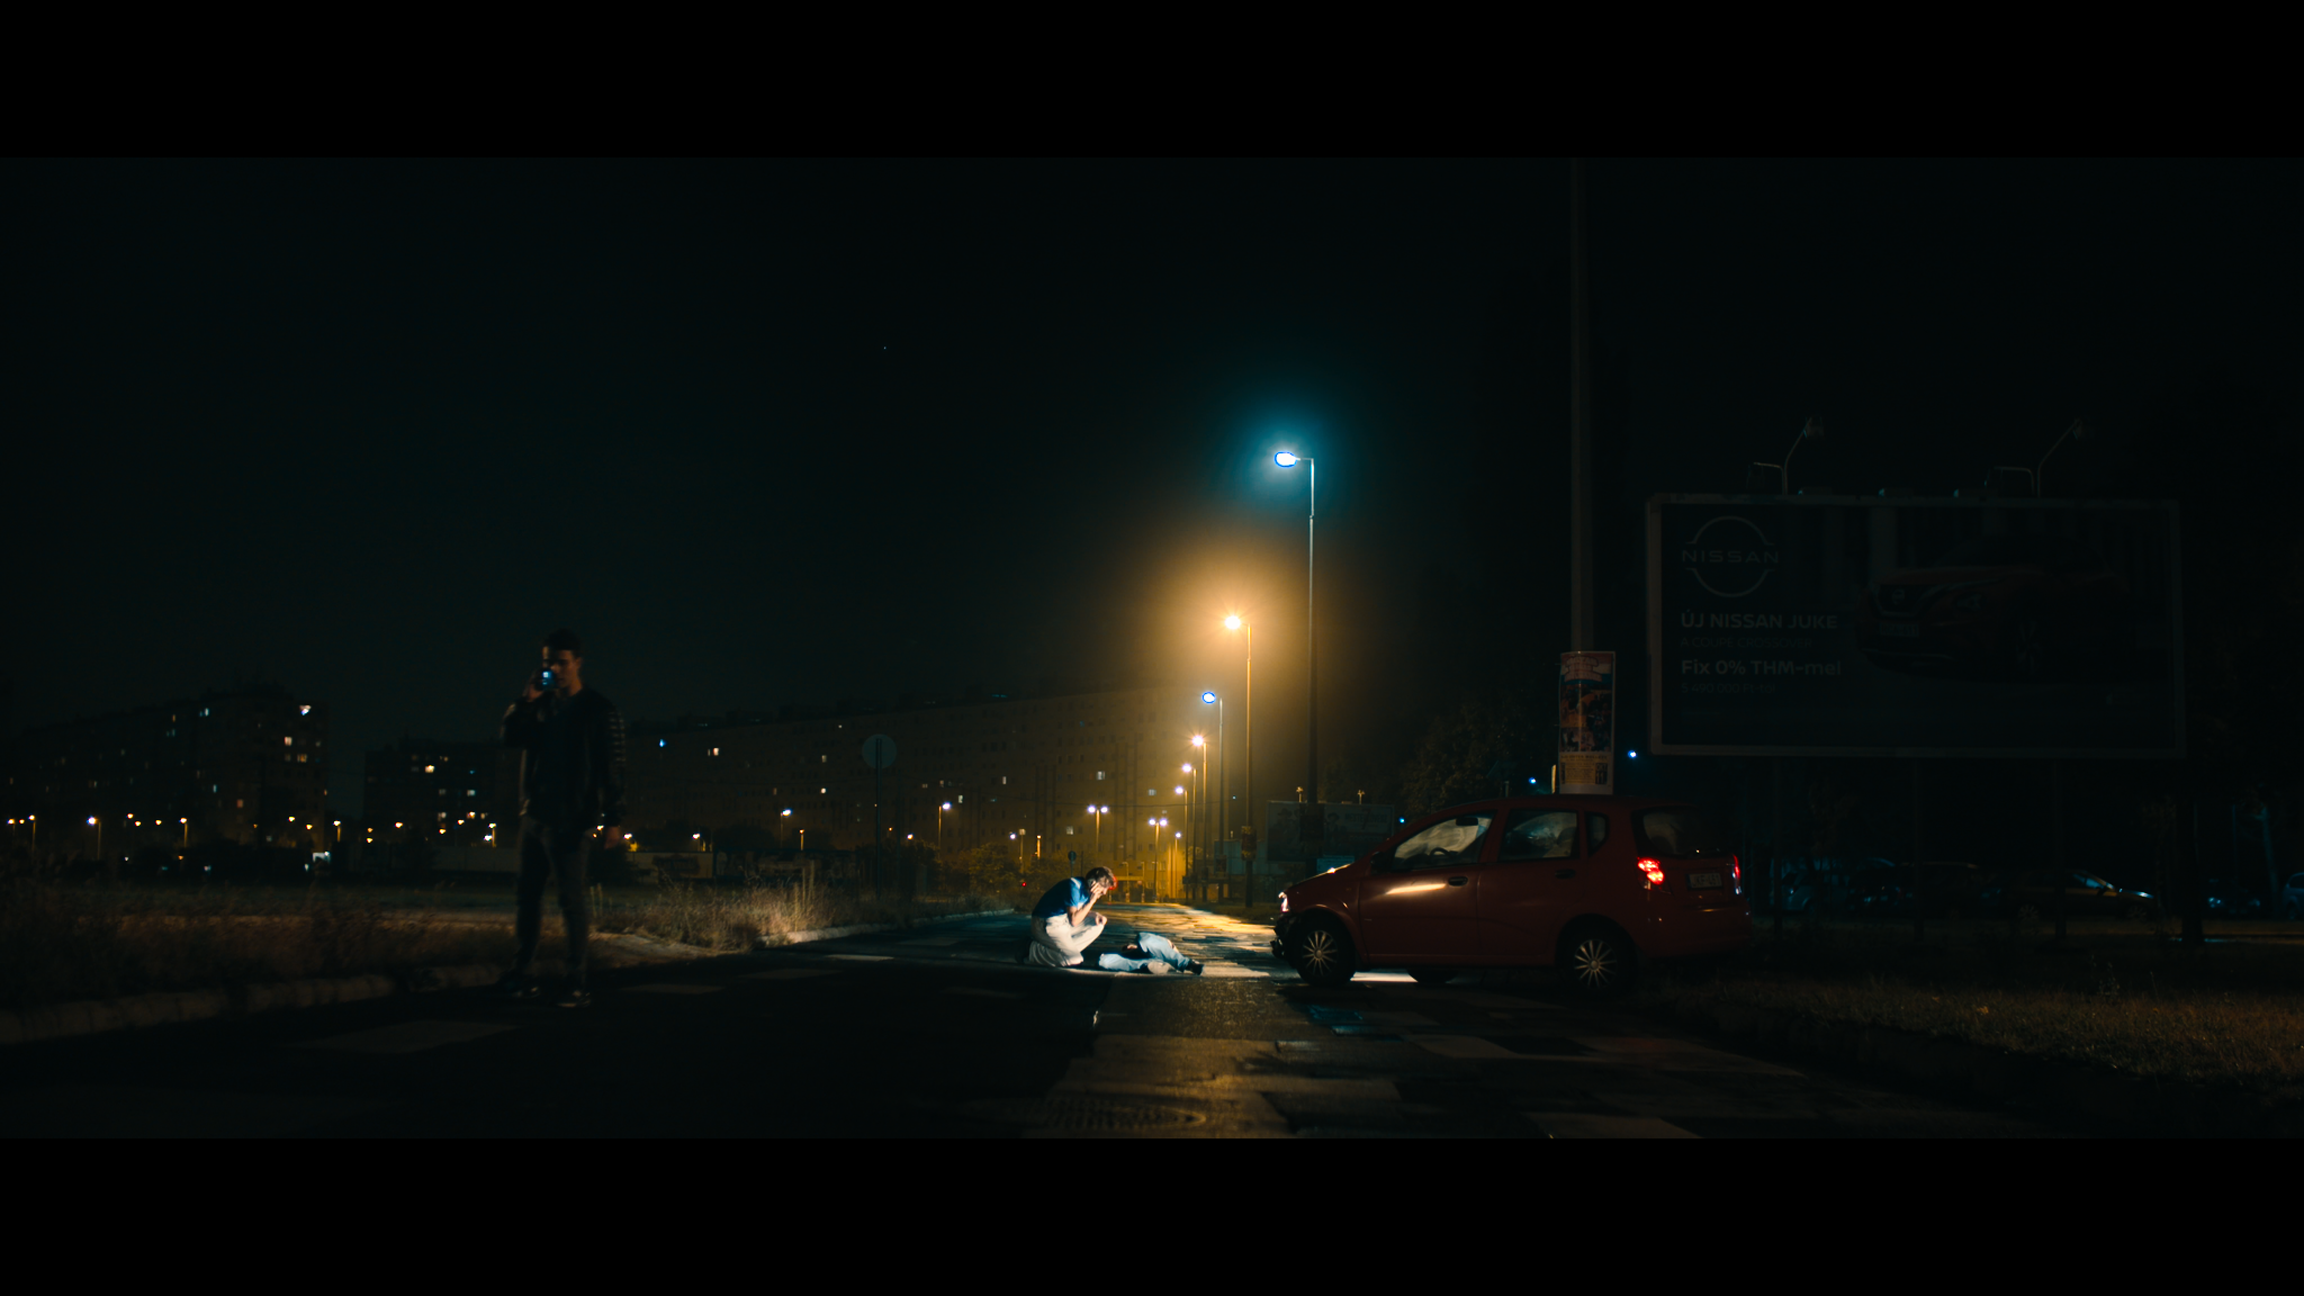 eszter galambos, Still from the movie Accident. Director: Bohdan Herkaliuk, Director of photography: Eszter Galambos, cast: Orbán Levente, colorist: Anna Stalter